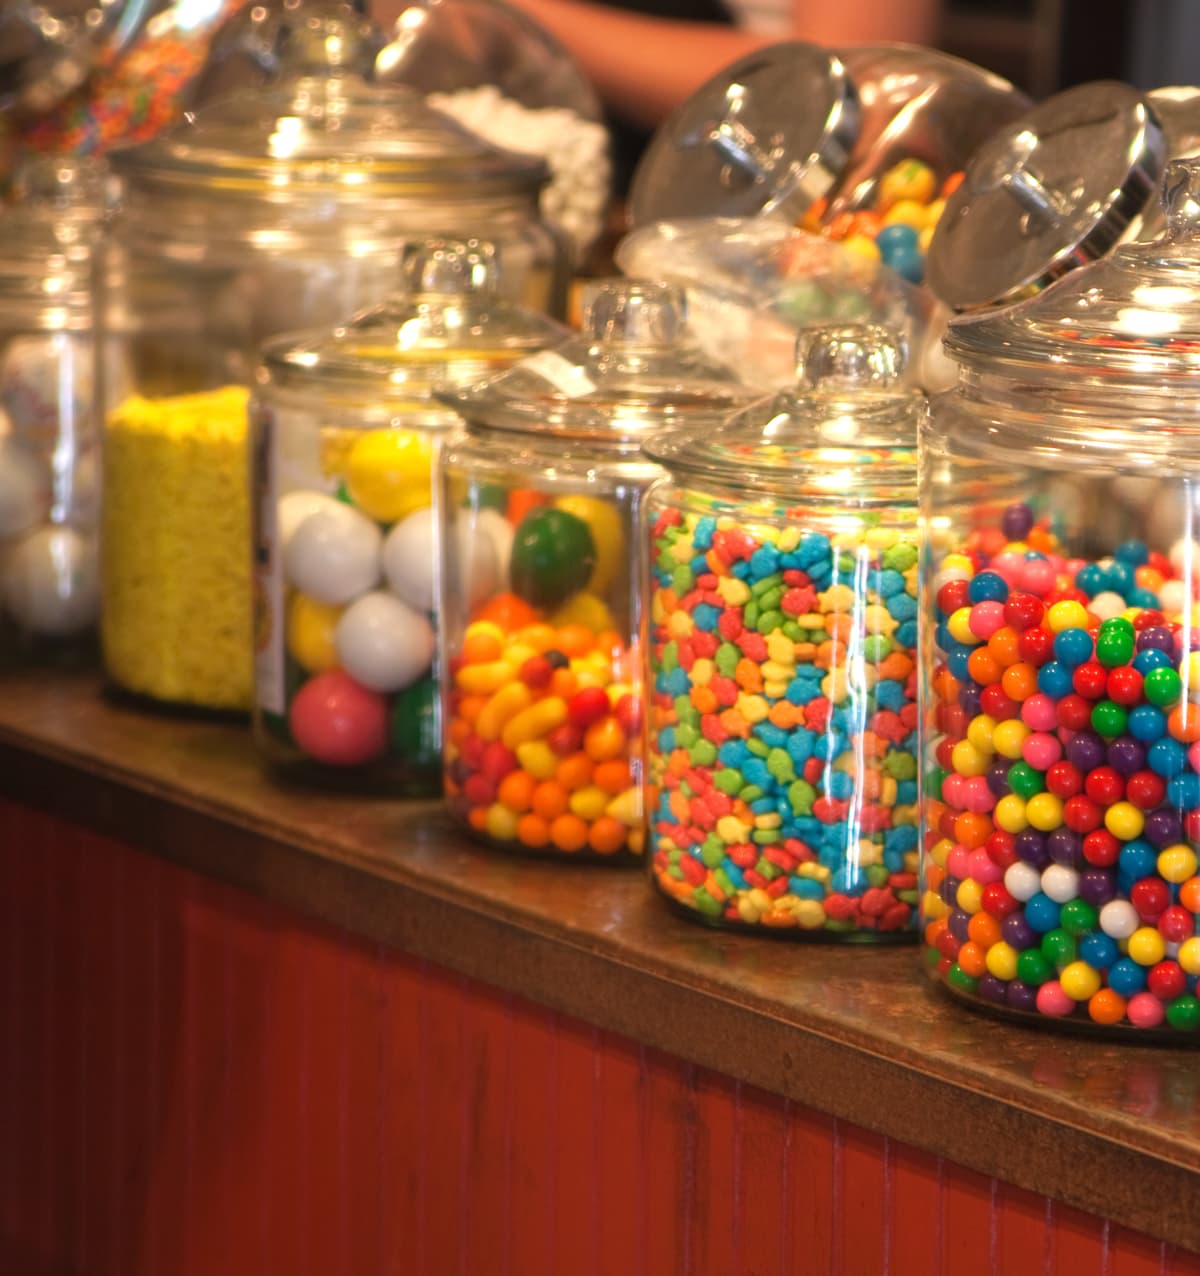 Old fashioned candy store with large jars of candy on the counter